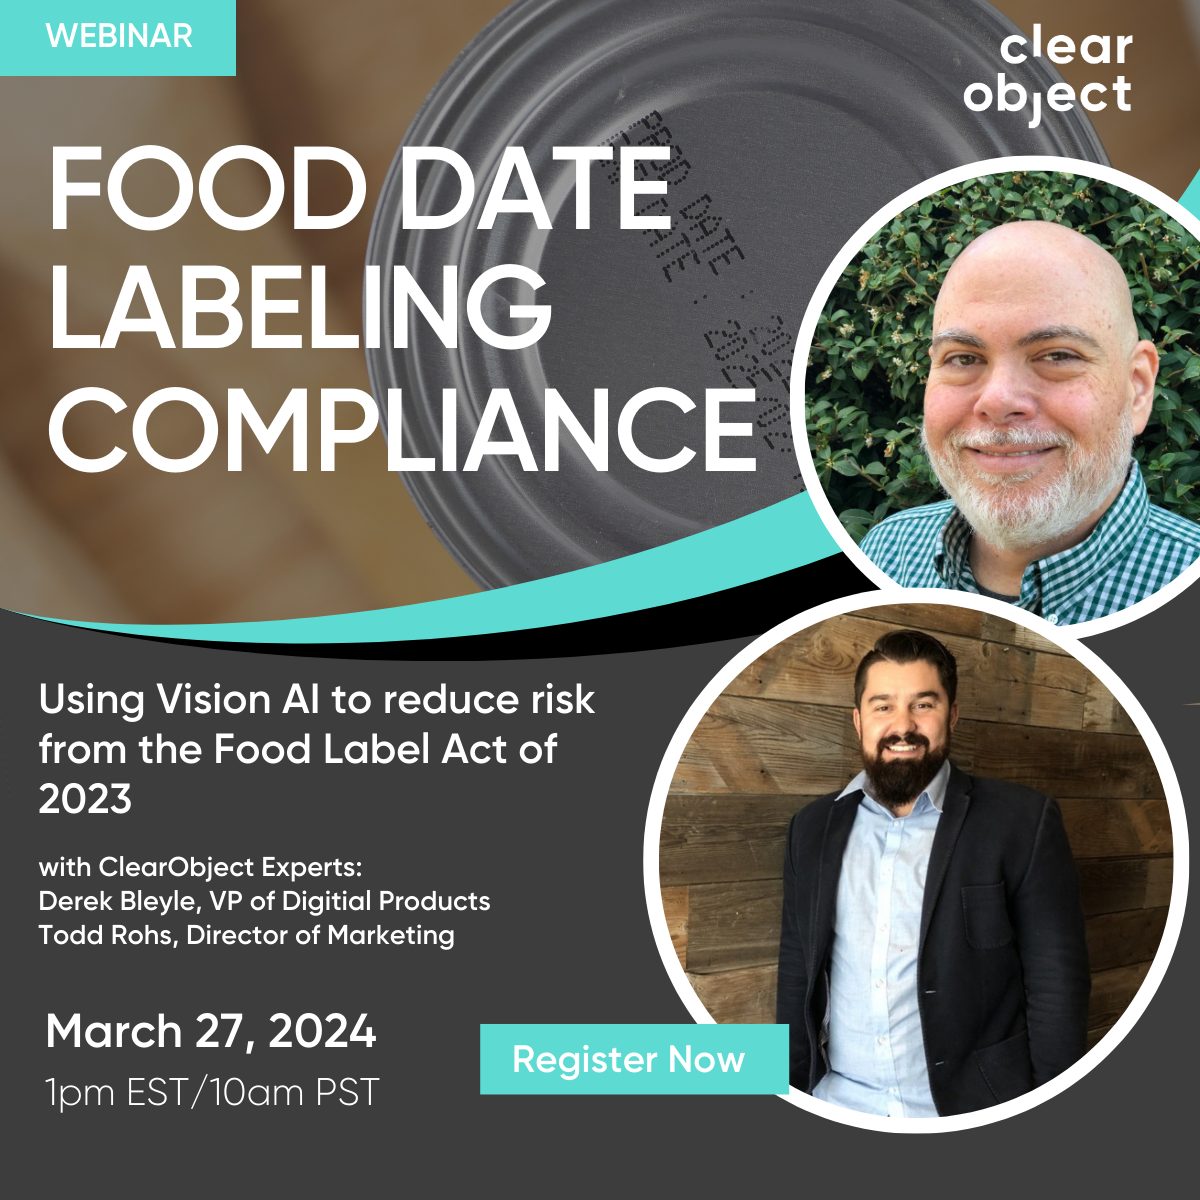 Invitation to the Food Date Label webinar March 27th.